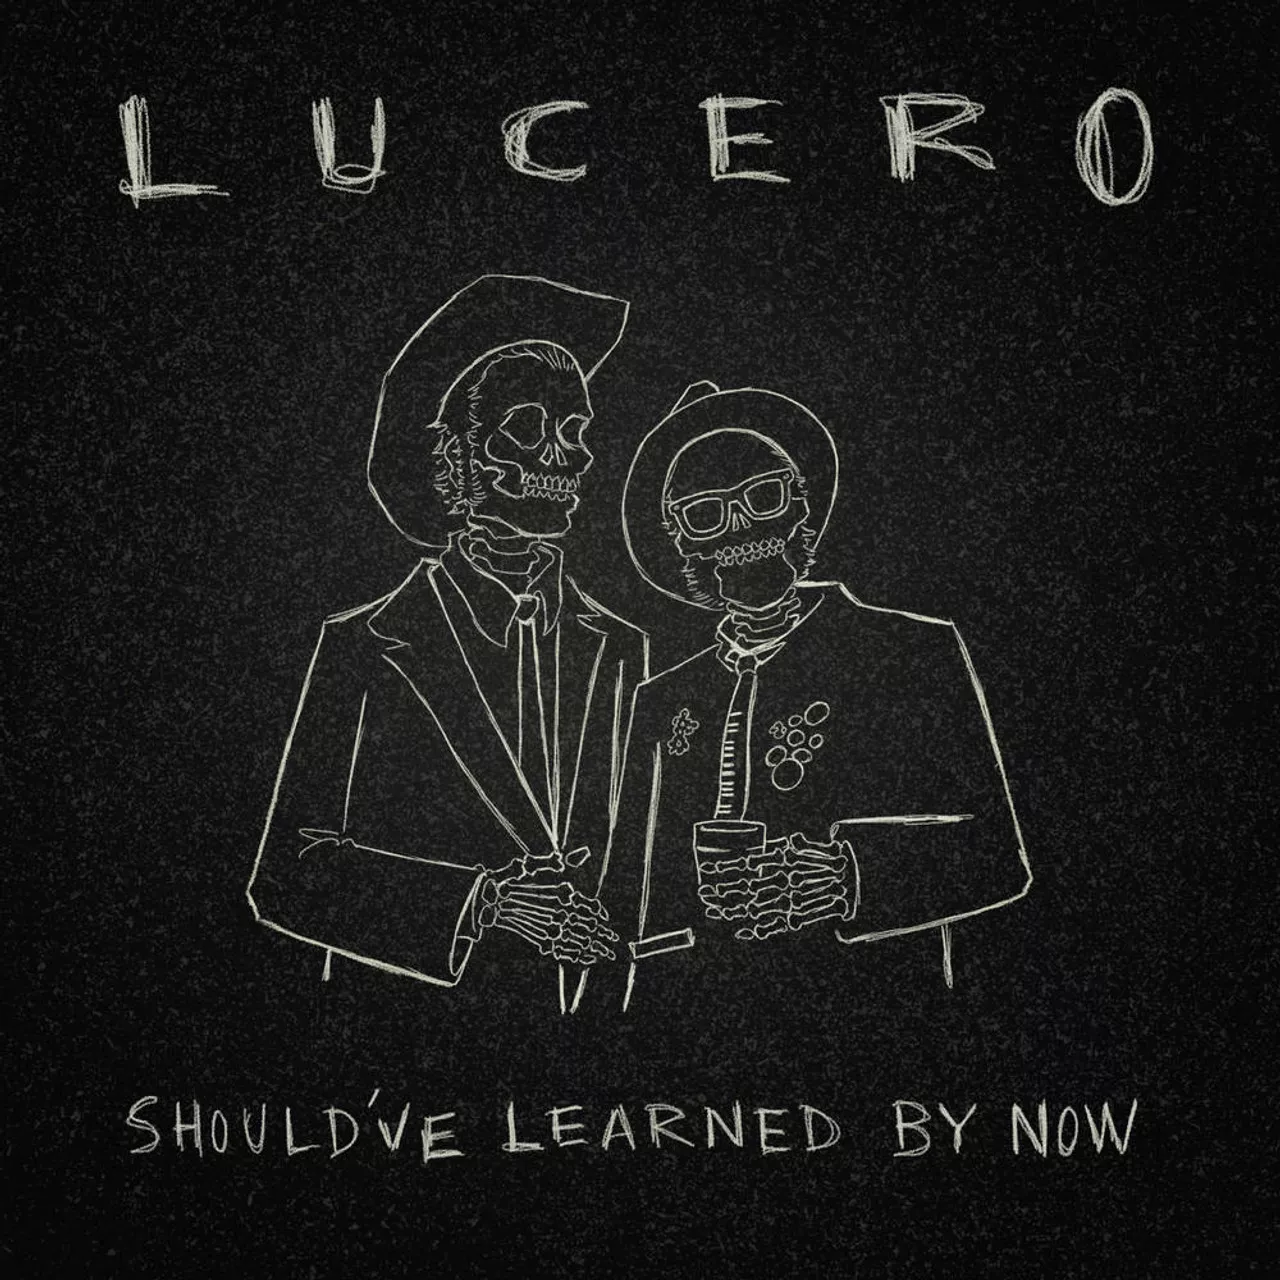 Should’ve Learned By Now - Lucero